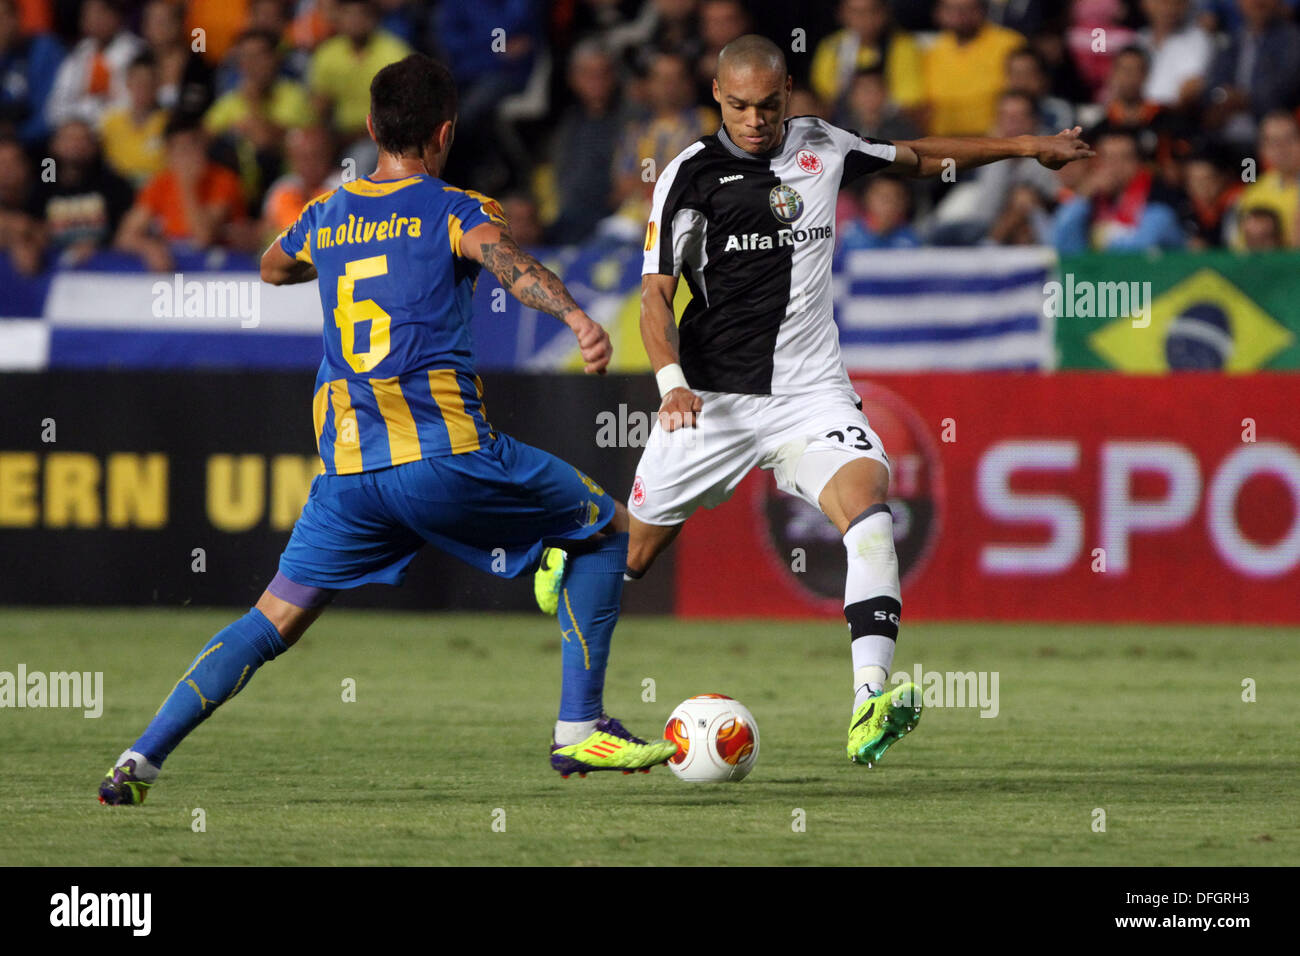 Nicosia, Cyprus. 03rd Oct, 2013. Eintracht Frankfurt's Anderson Bamba  and Apoel's Marcelo Oliveira during thei Europa League group F soccer match at GSP stadium in Nicosia, Cyprus, Thursday, Oct. 3, 2013. © Yiannis Kourtoglou/Alamy Live News Stock Photo